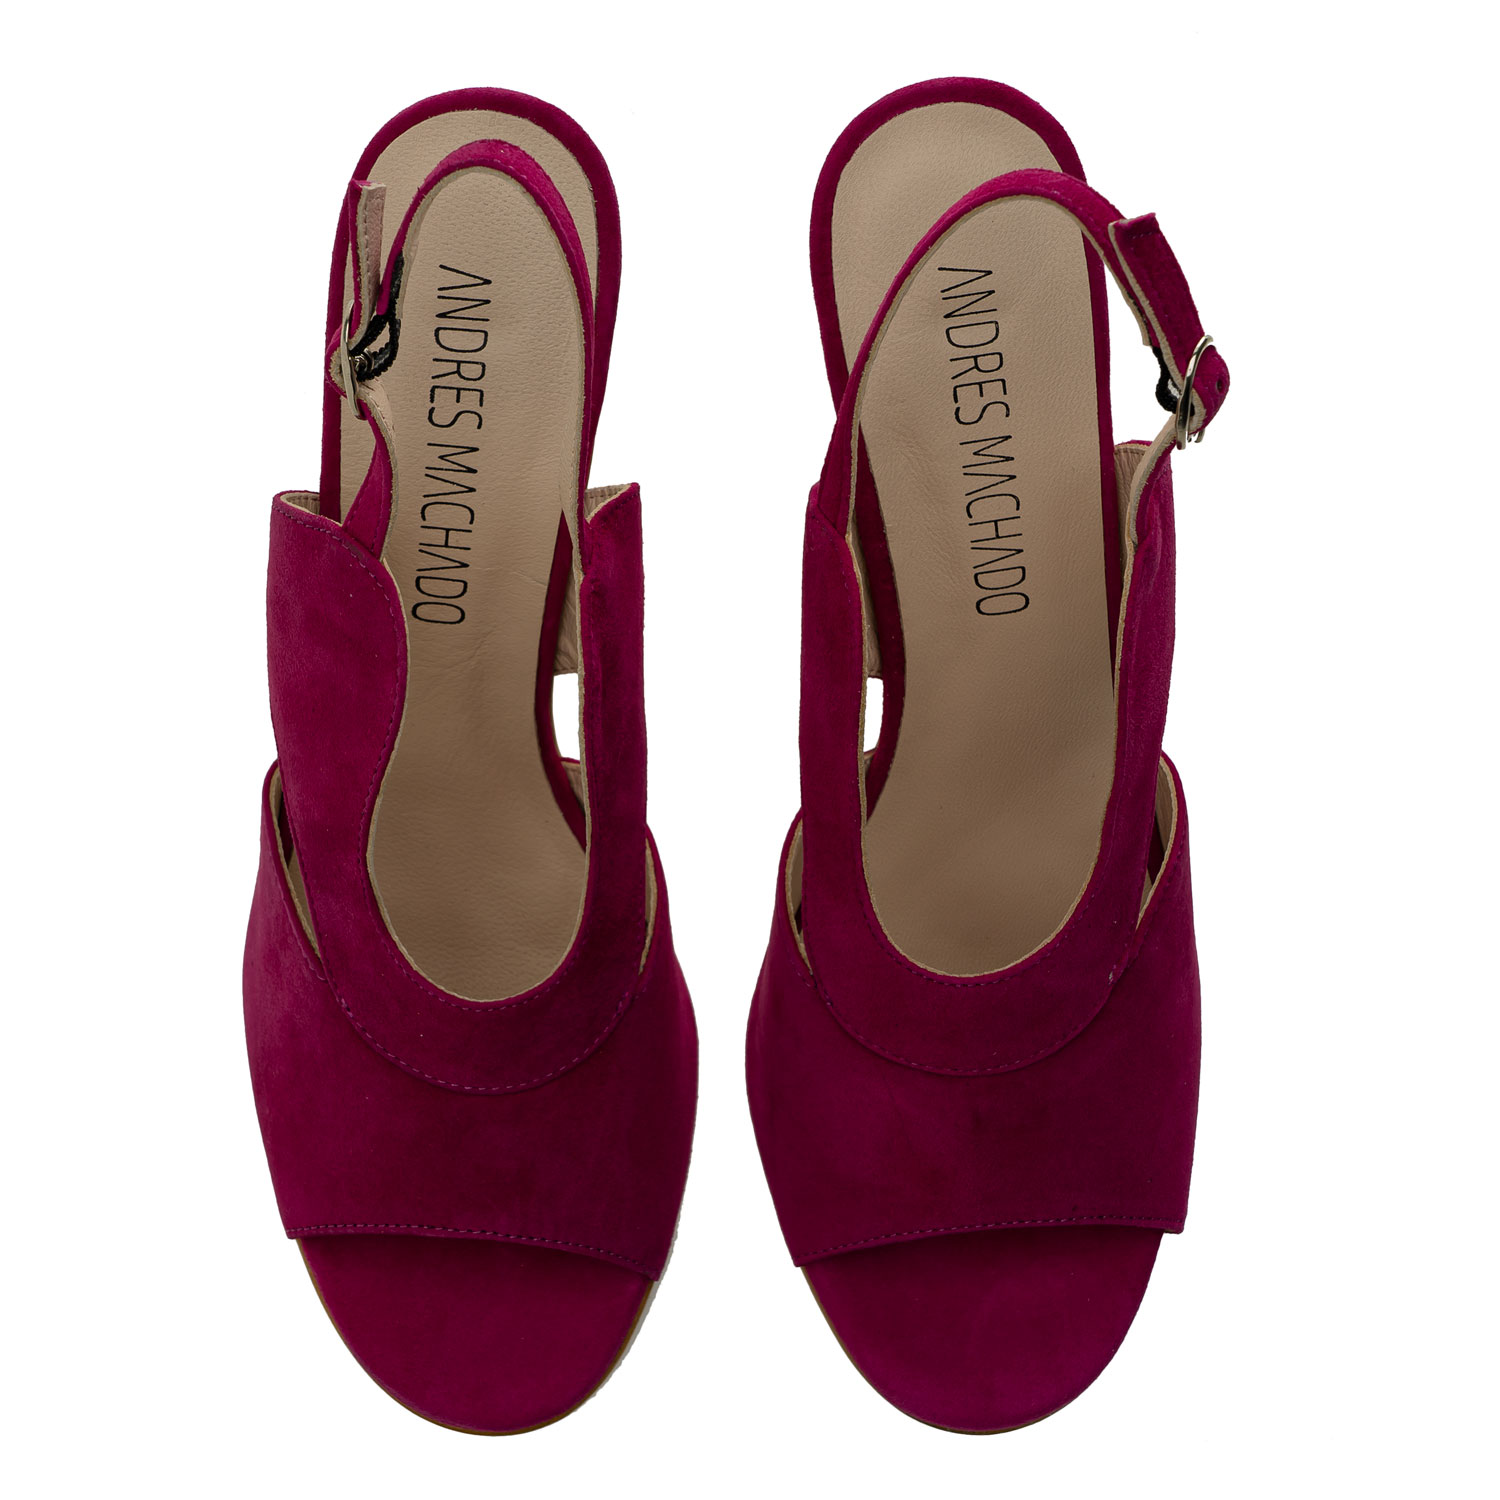 Slingback Sandals in Fuchsia Suede Leather 